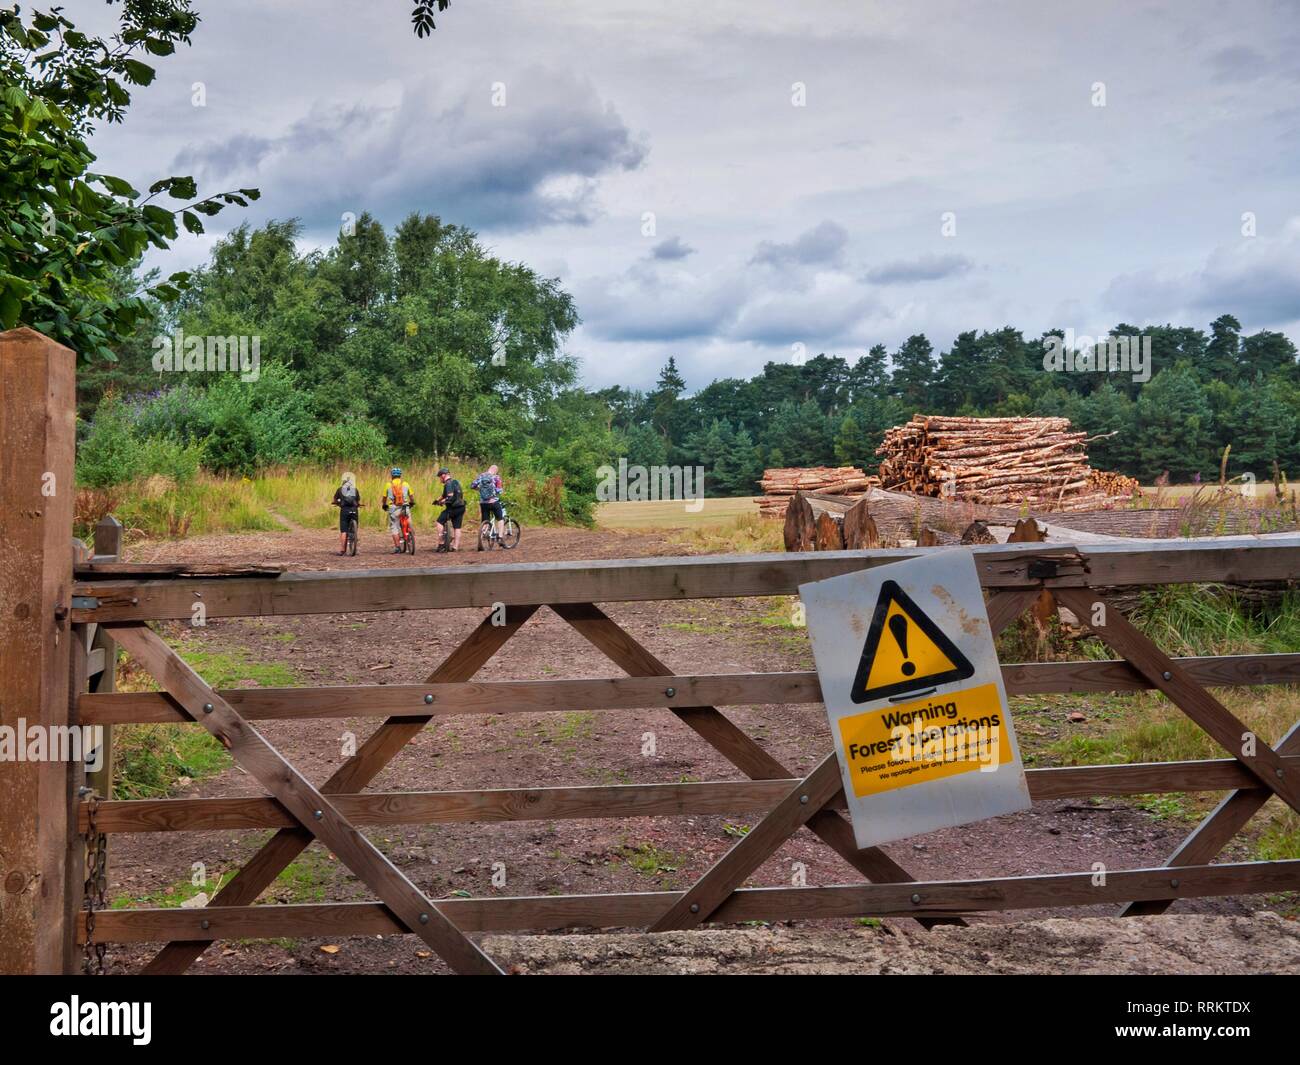 Mountain bikers ignore signs warning of forest operations in the surrounding area. Stock Photo